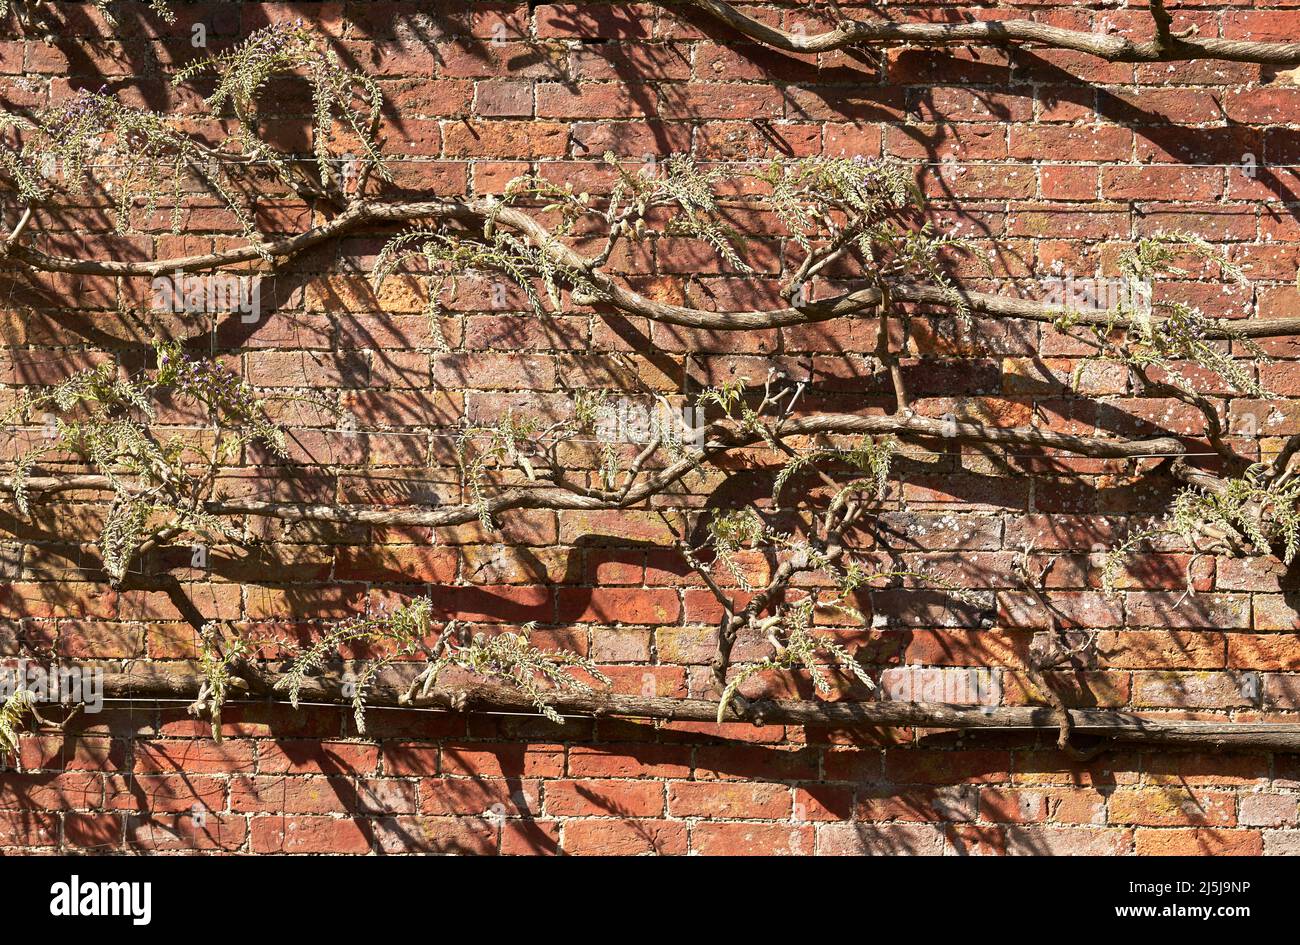 Wisteria vines trained to grow on a wall Stock Photo